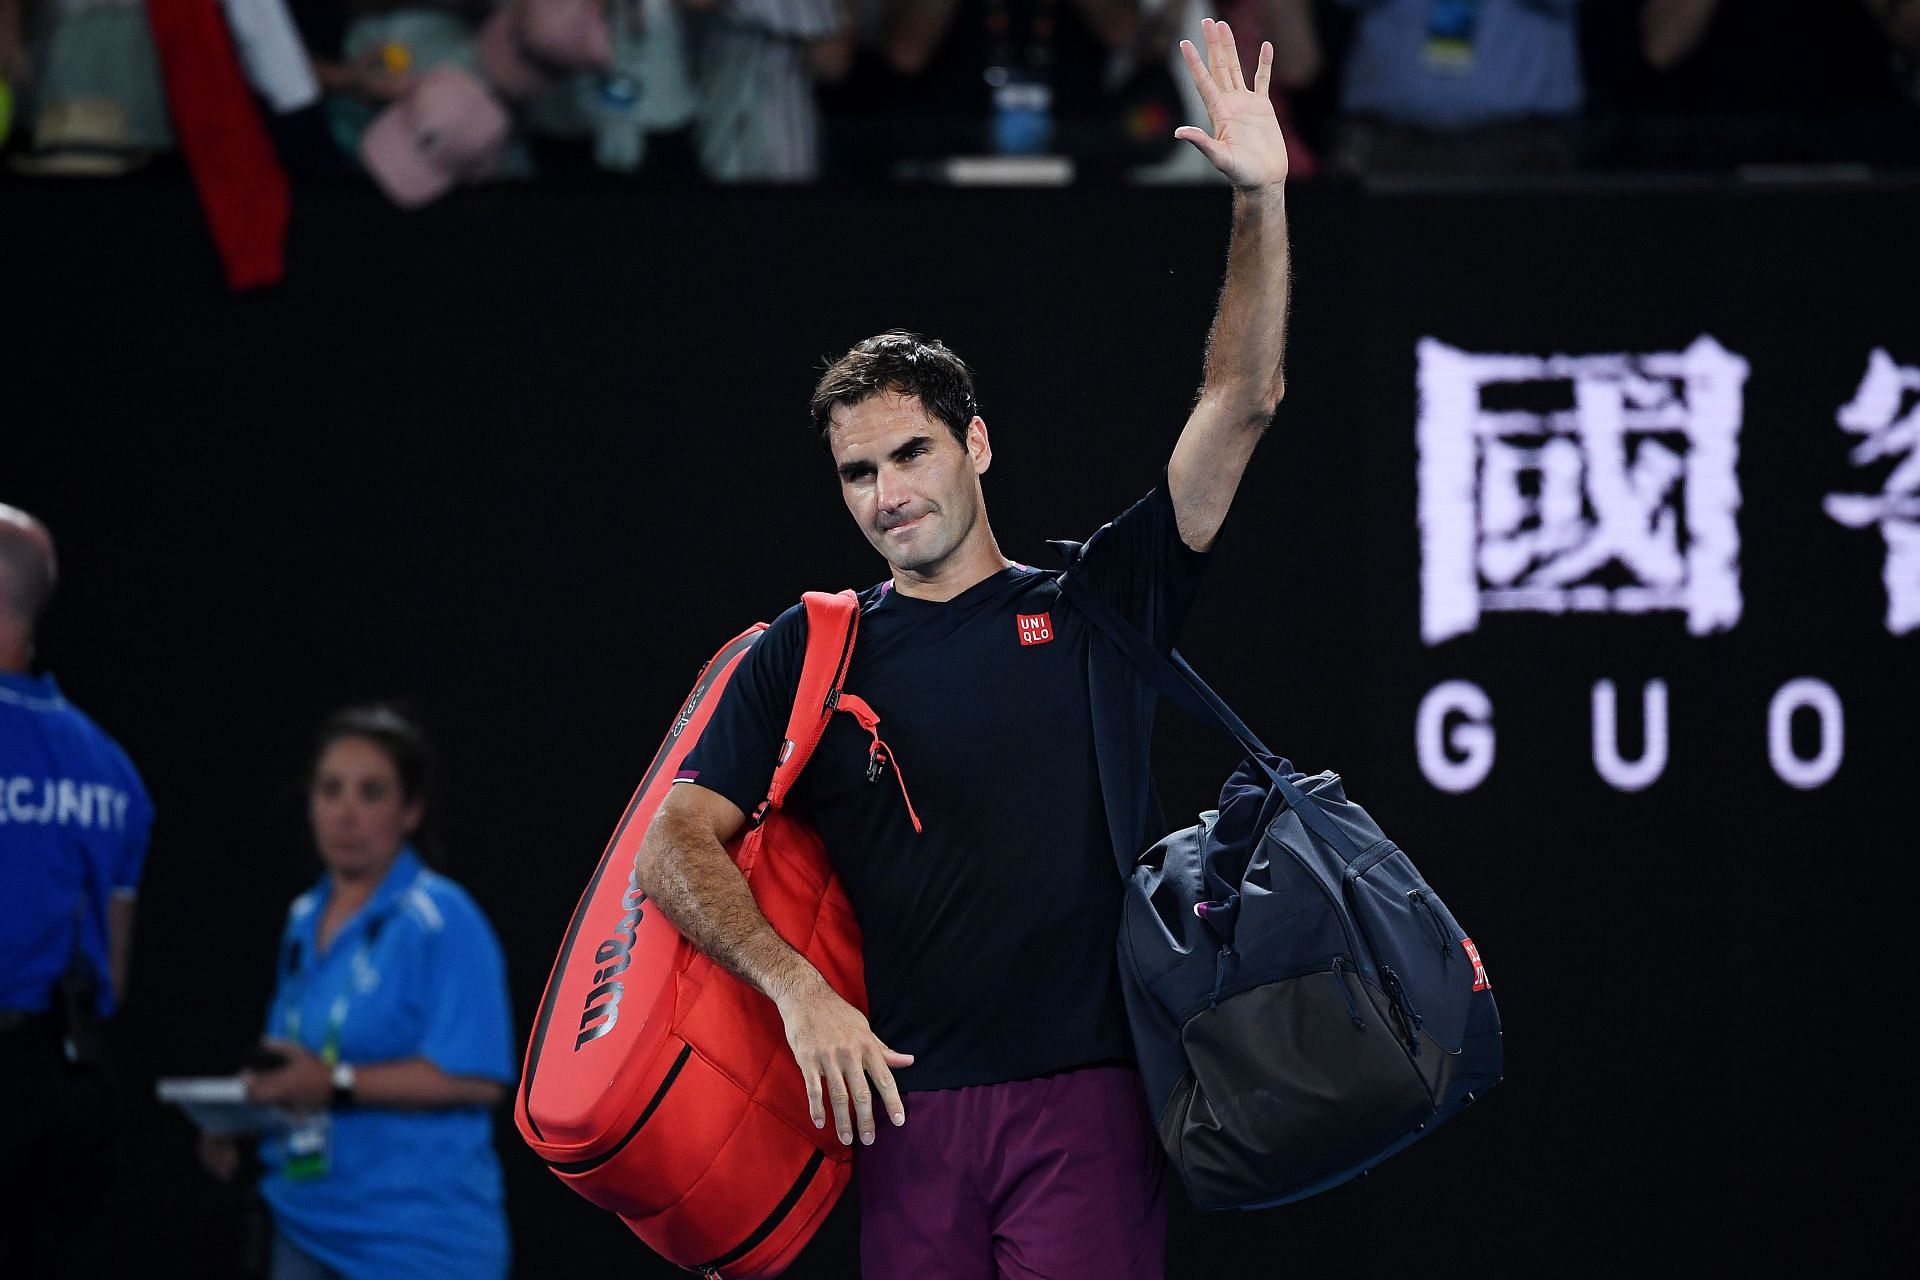 Rpger Federer leaves the court after his semifinal defeat to Novak Djokovic at the 2020 Australian Open